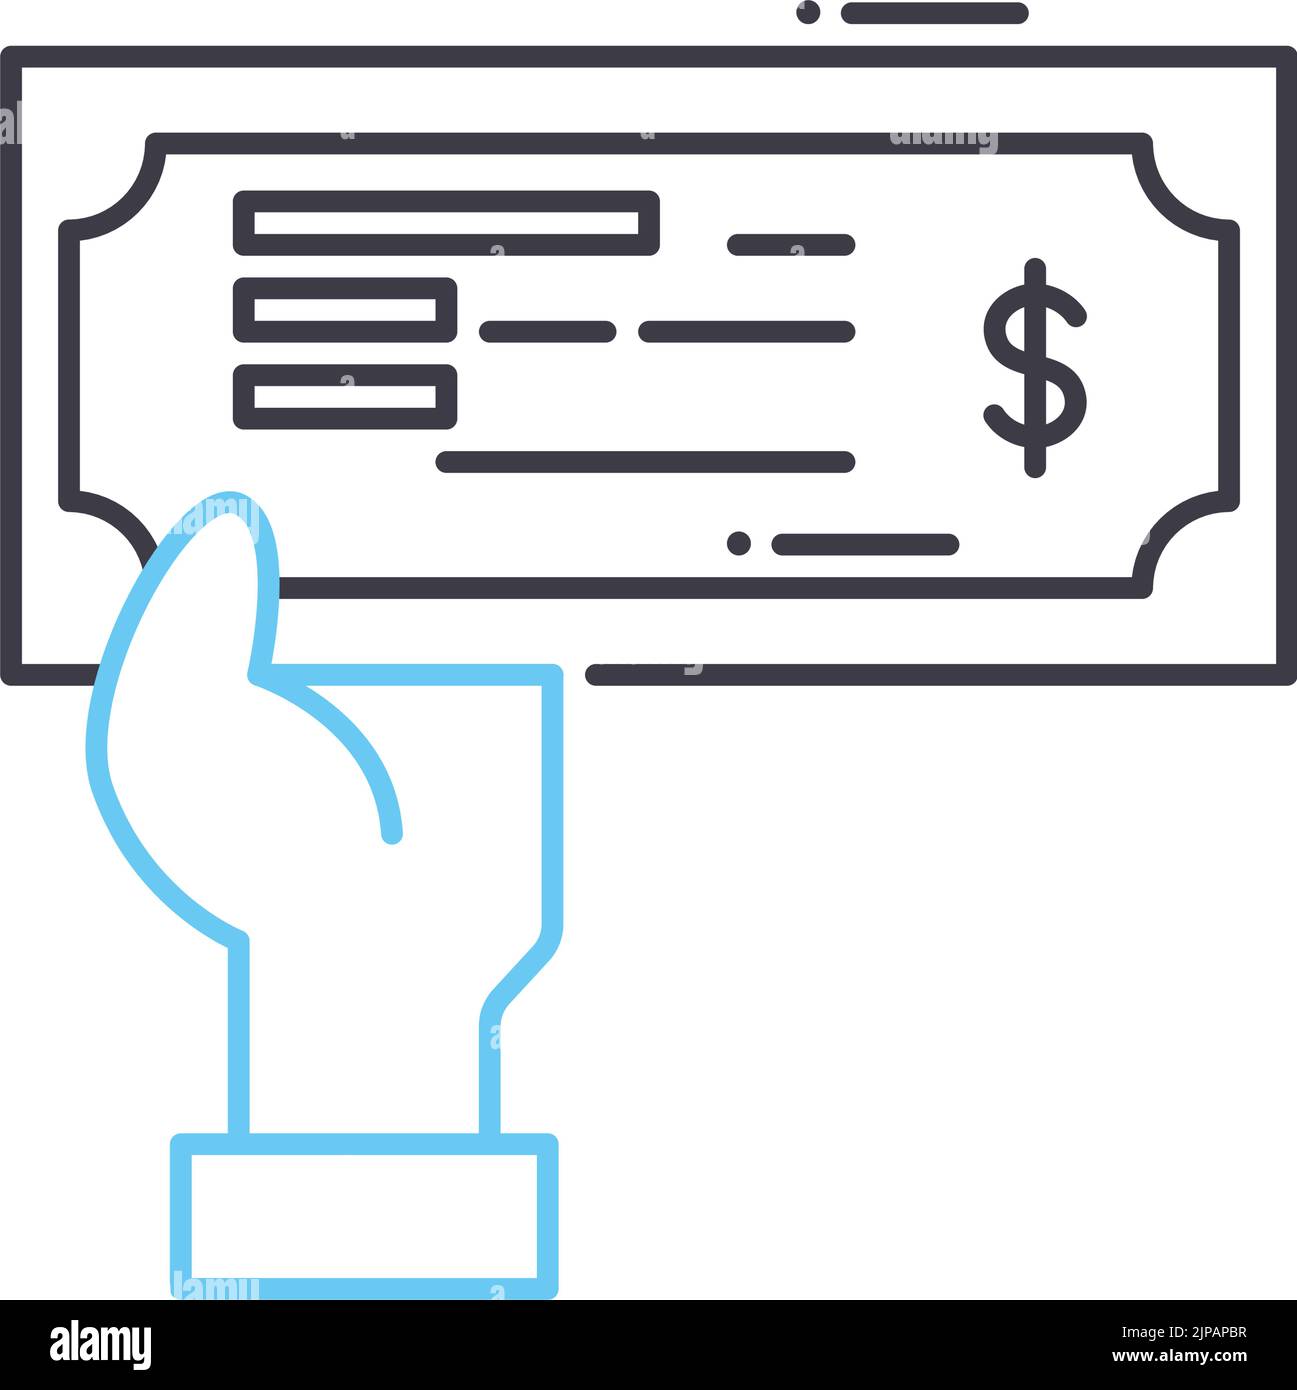 pay with check line icon, outline symbol, vector illustration, concept sign Stock Vector